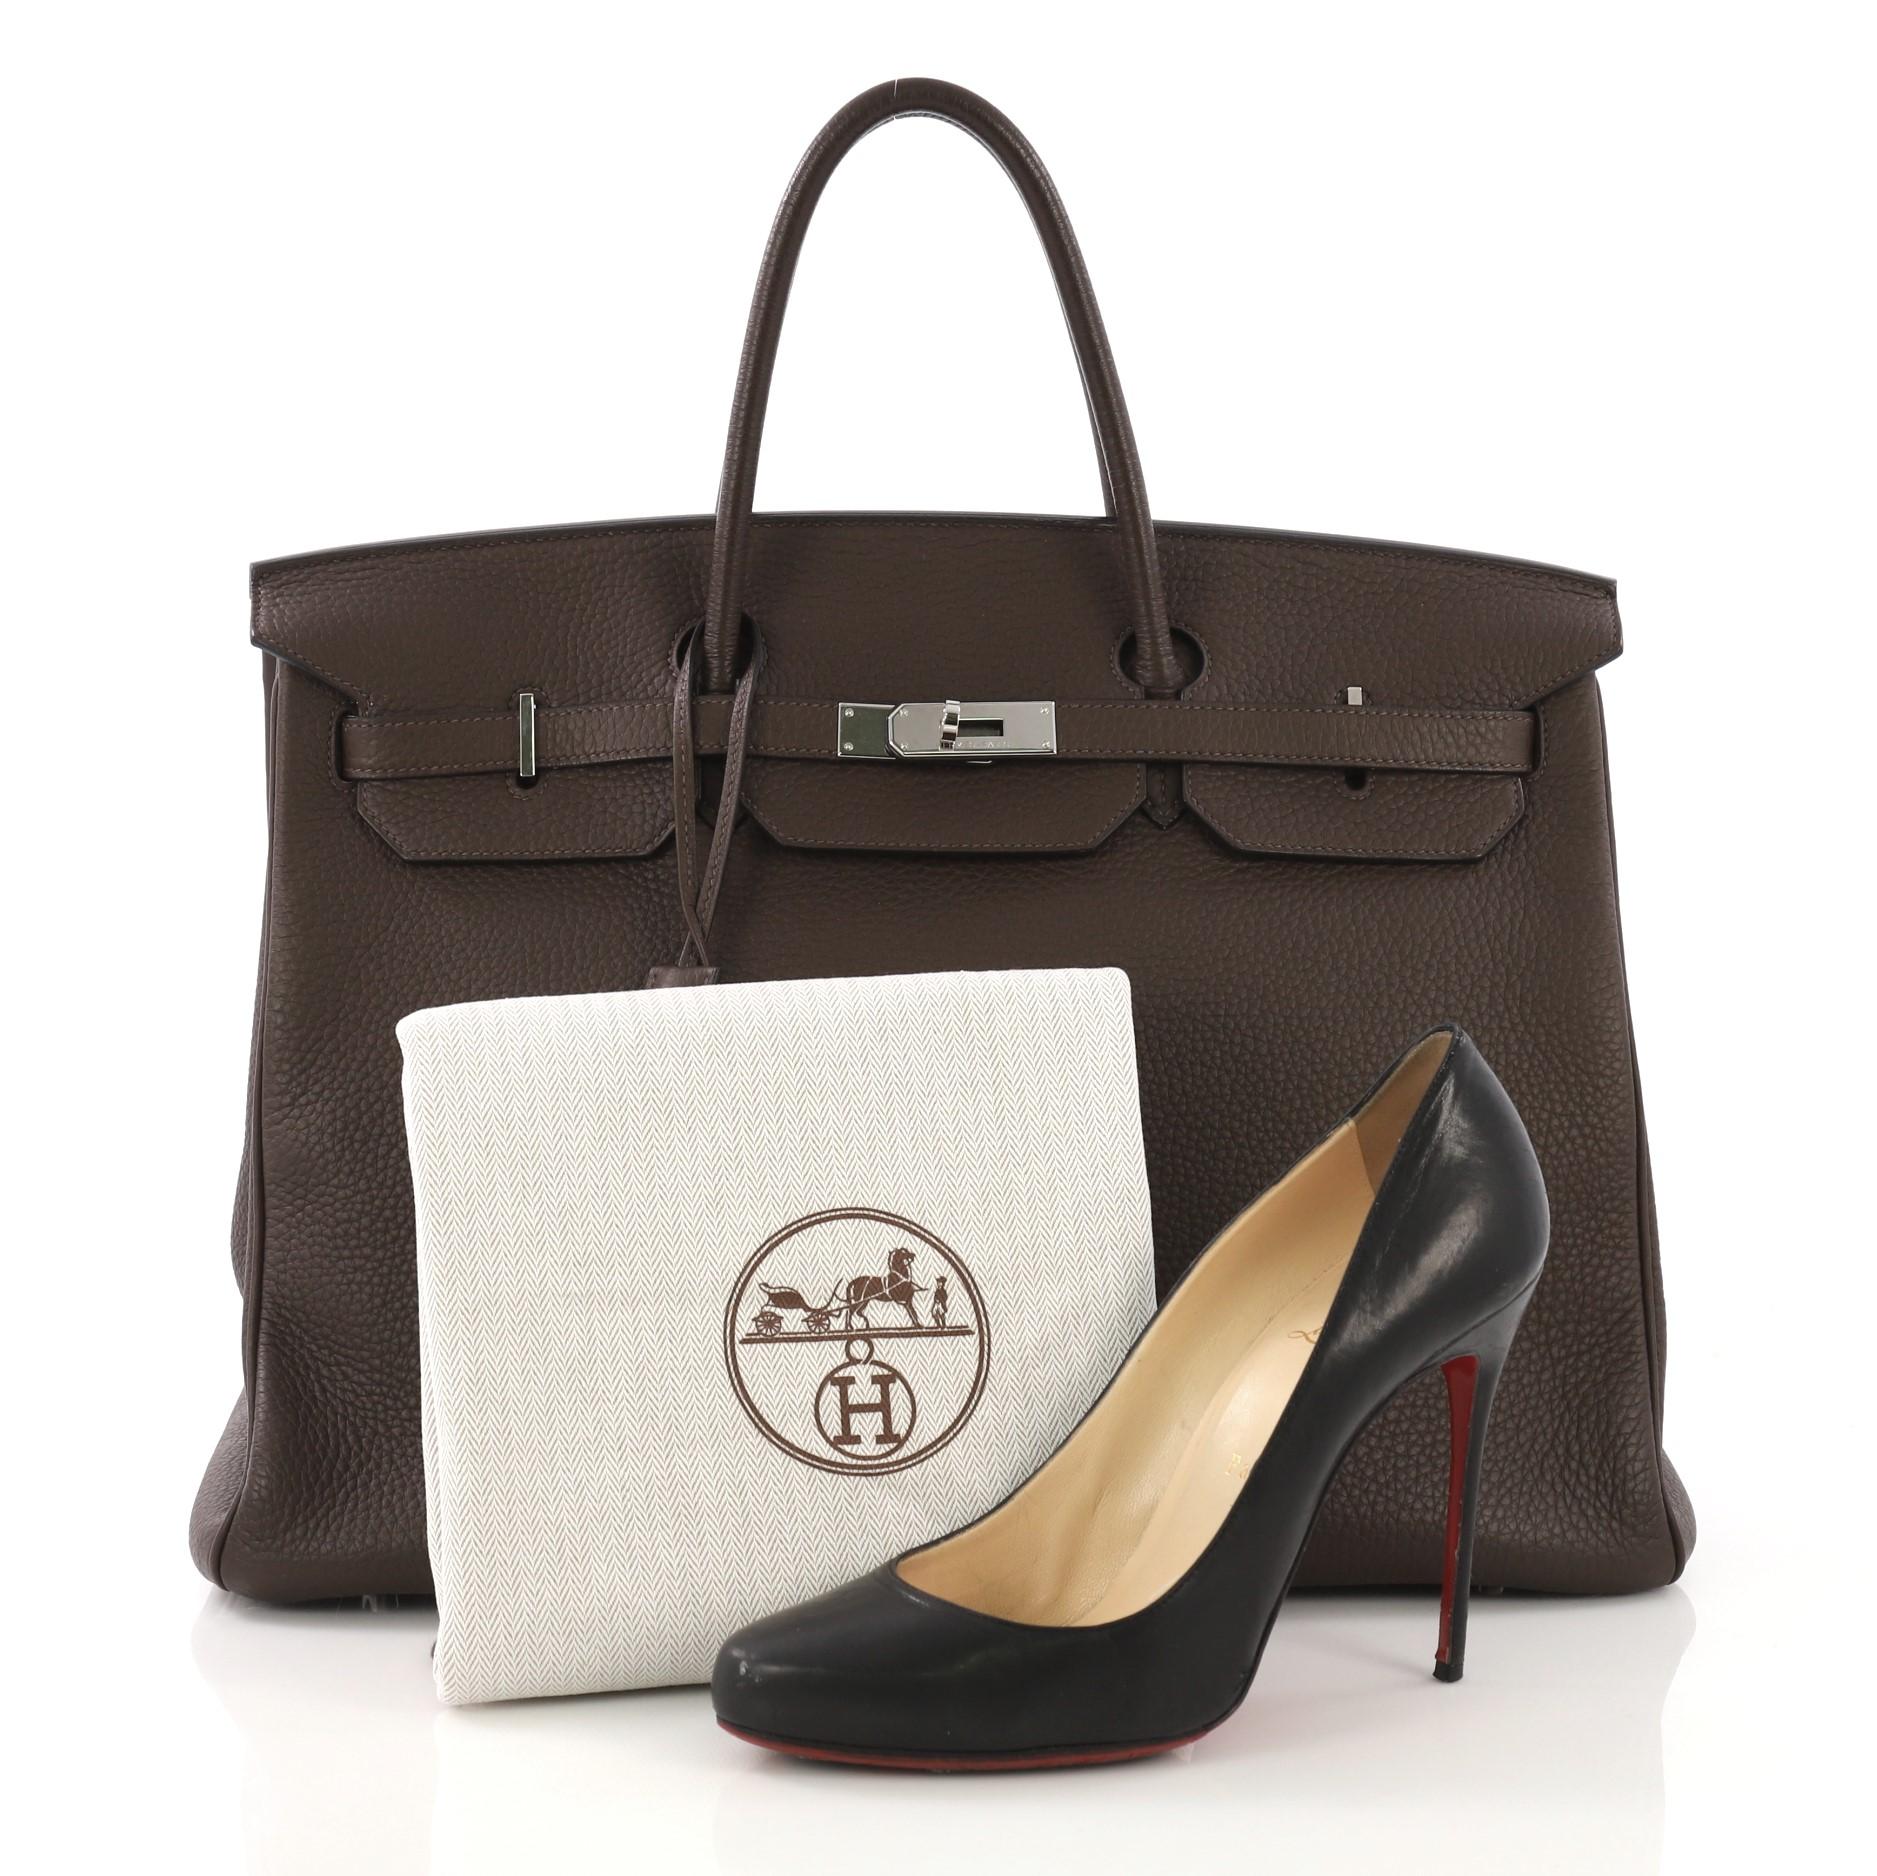 This Hermes Birkin Handbag Chocolat Clemence with Palladium Hardware 40, crafted in Chocolat brown Clemence leather, features dual rolled handles, a frontal flap, and palladium hardware. Its turn-lock closure opens to a Chocolat brown Chevre leather